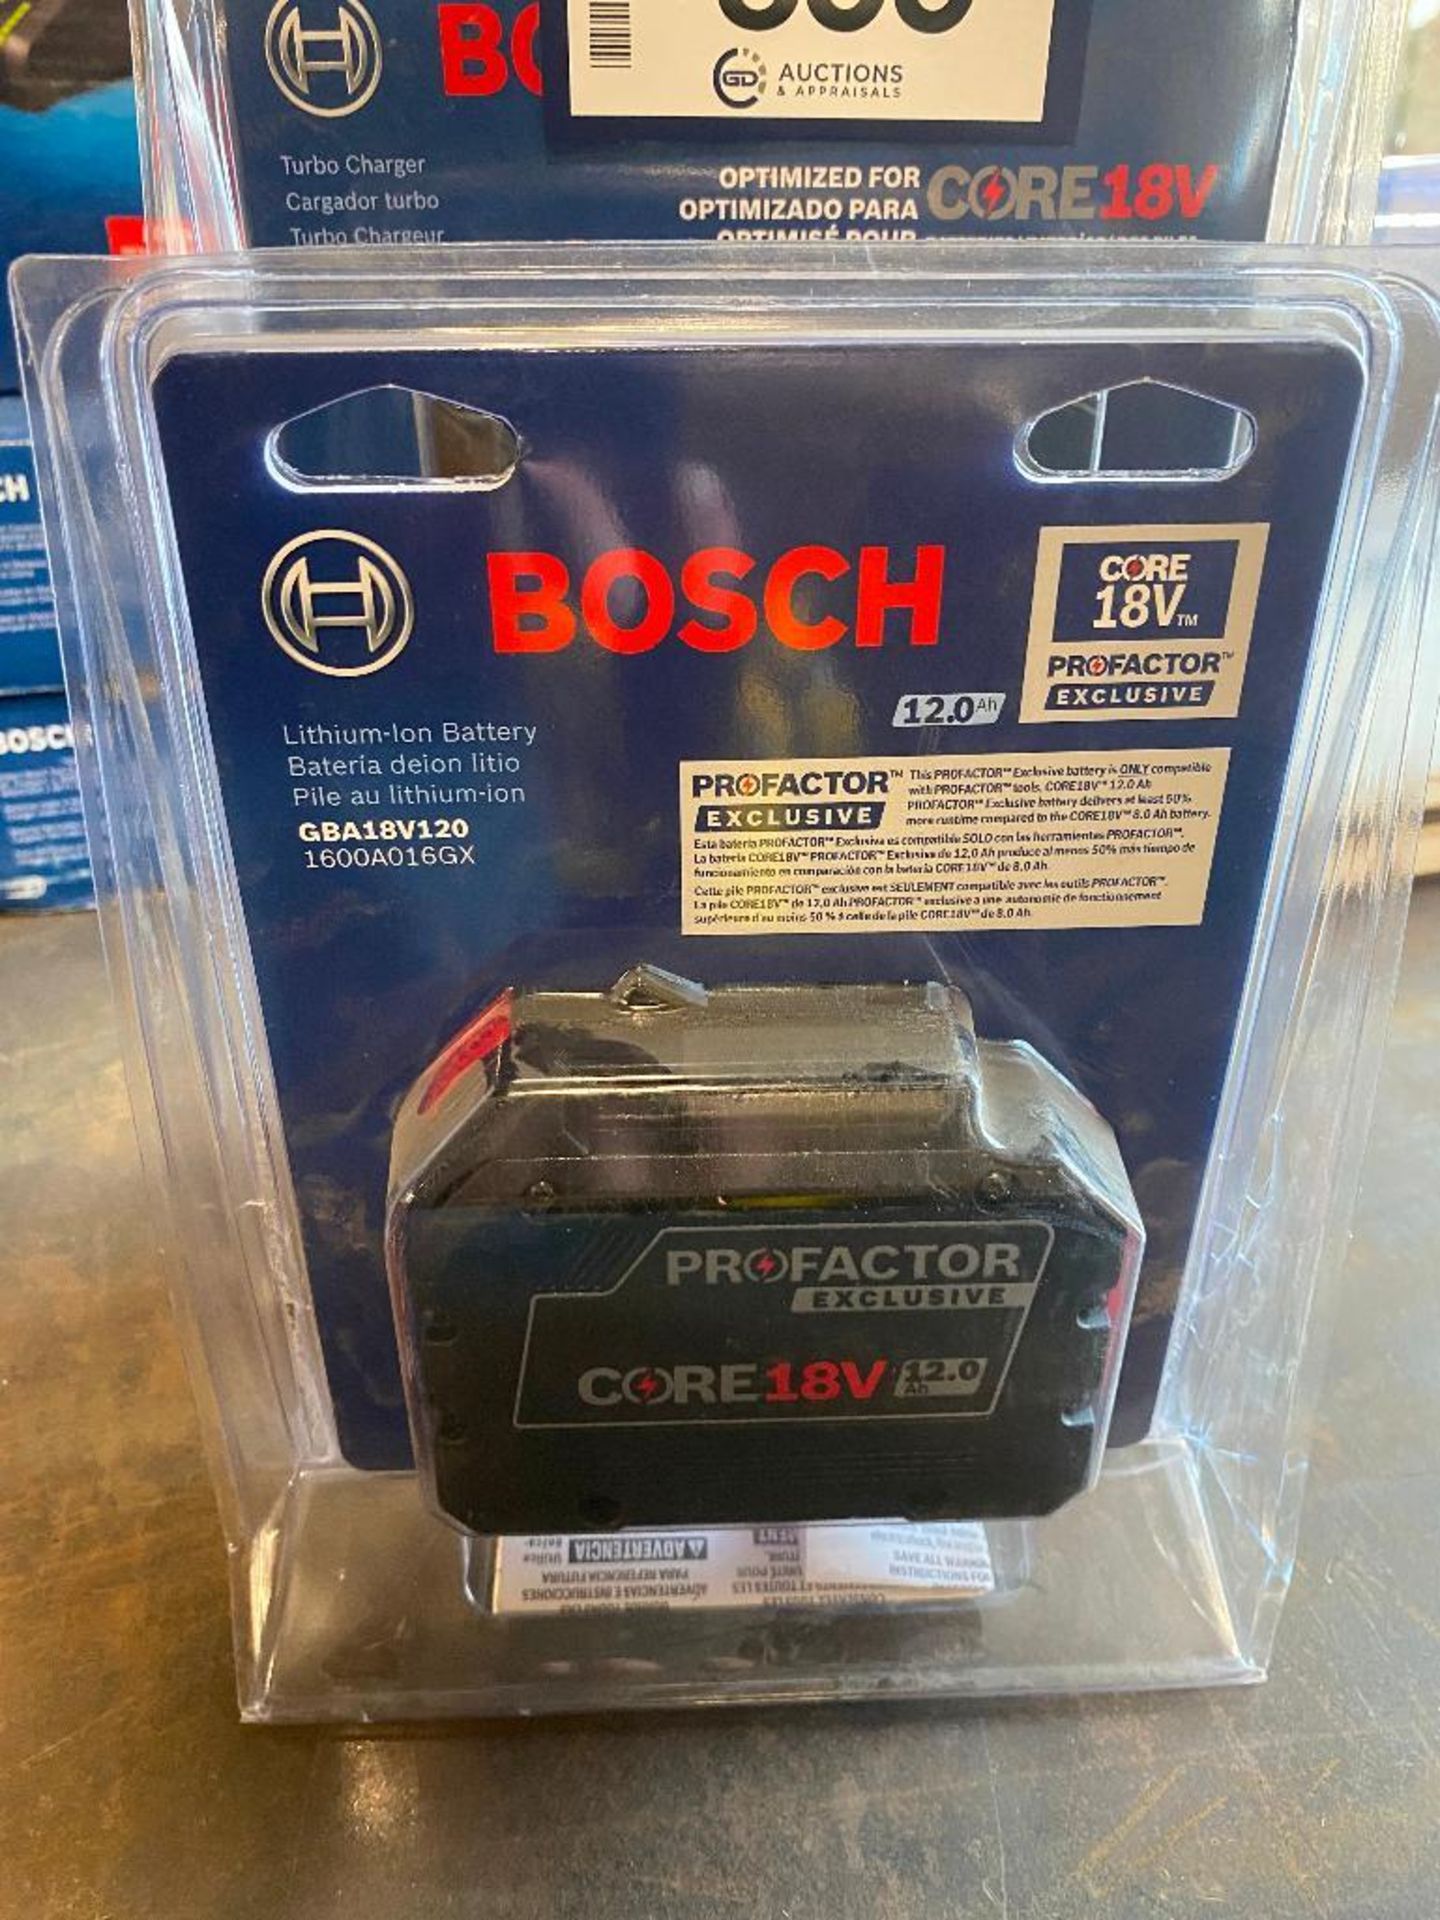 Lot of Bosch Turbo Charger and Bosch Lithium-Ion Battery - Image 2 of 3